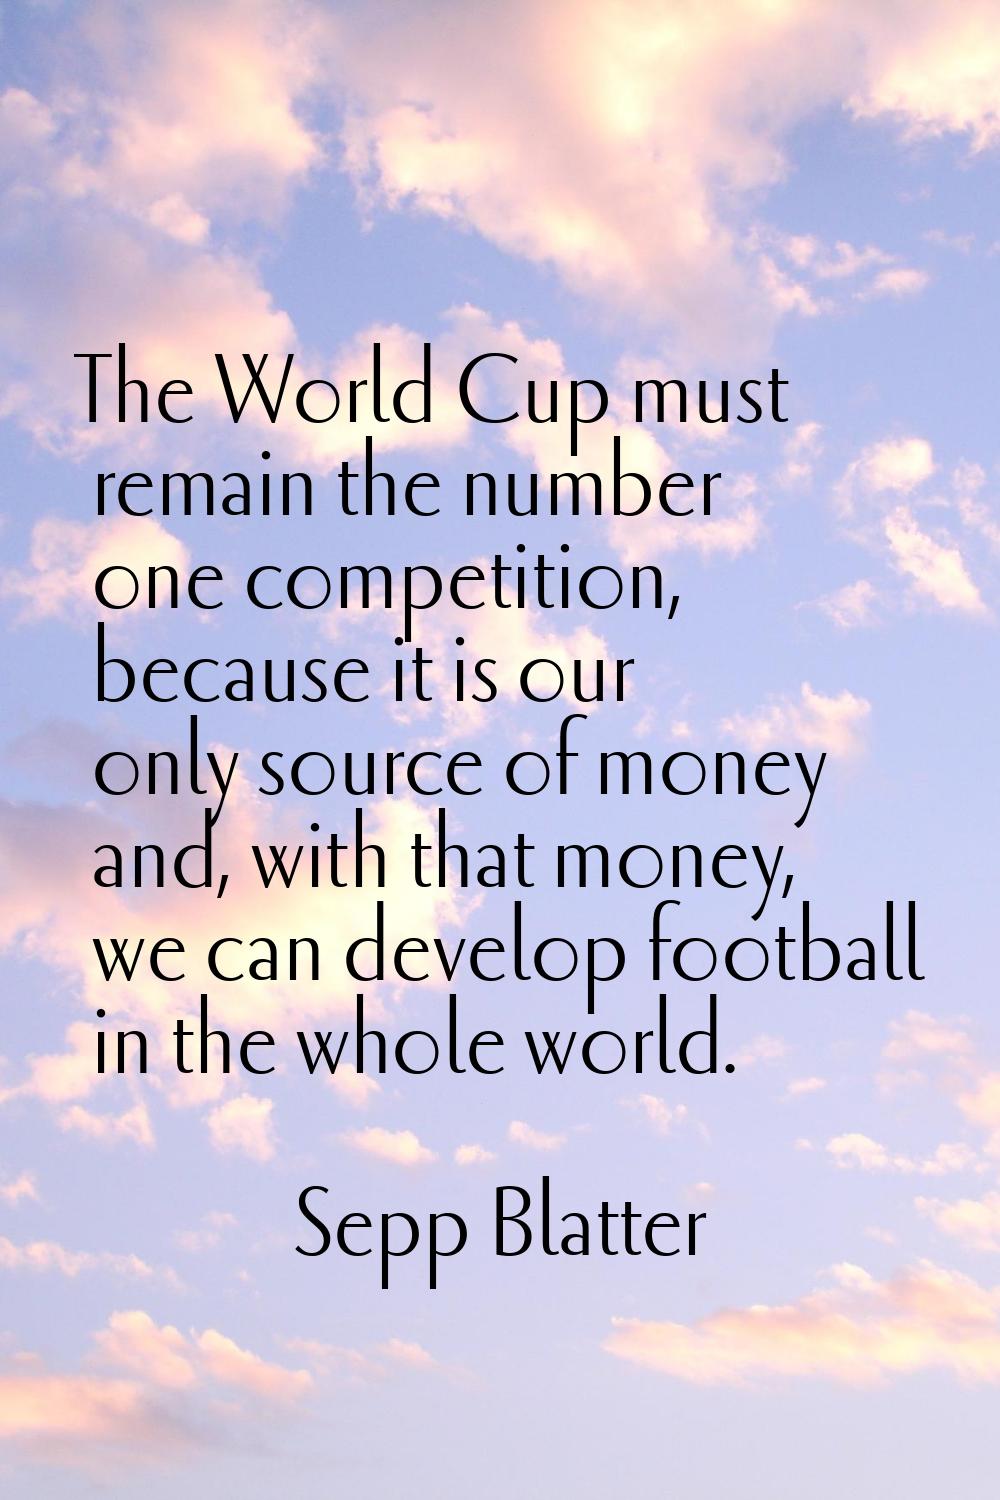 The World Cup must remain the number one competition, because it is our only source of money and, w